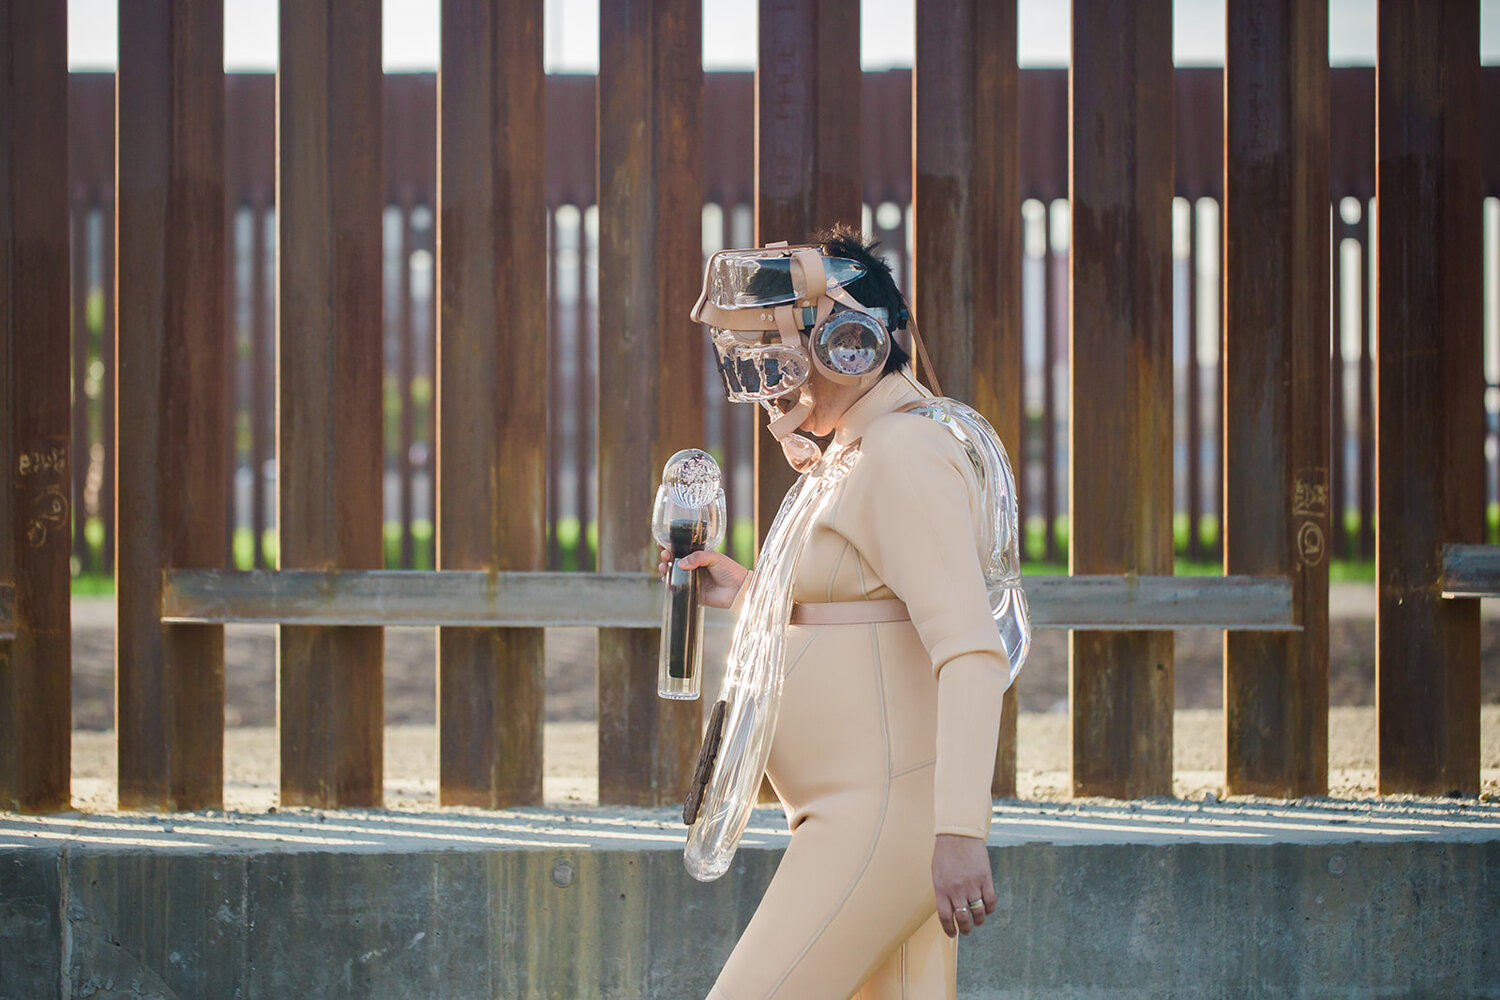 Alum Tanya Aguiñiga in a suit and mask made of flesh-toned neoprene, glass and metal, walking the length of the border wall in the southern US.